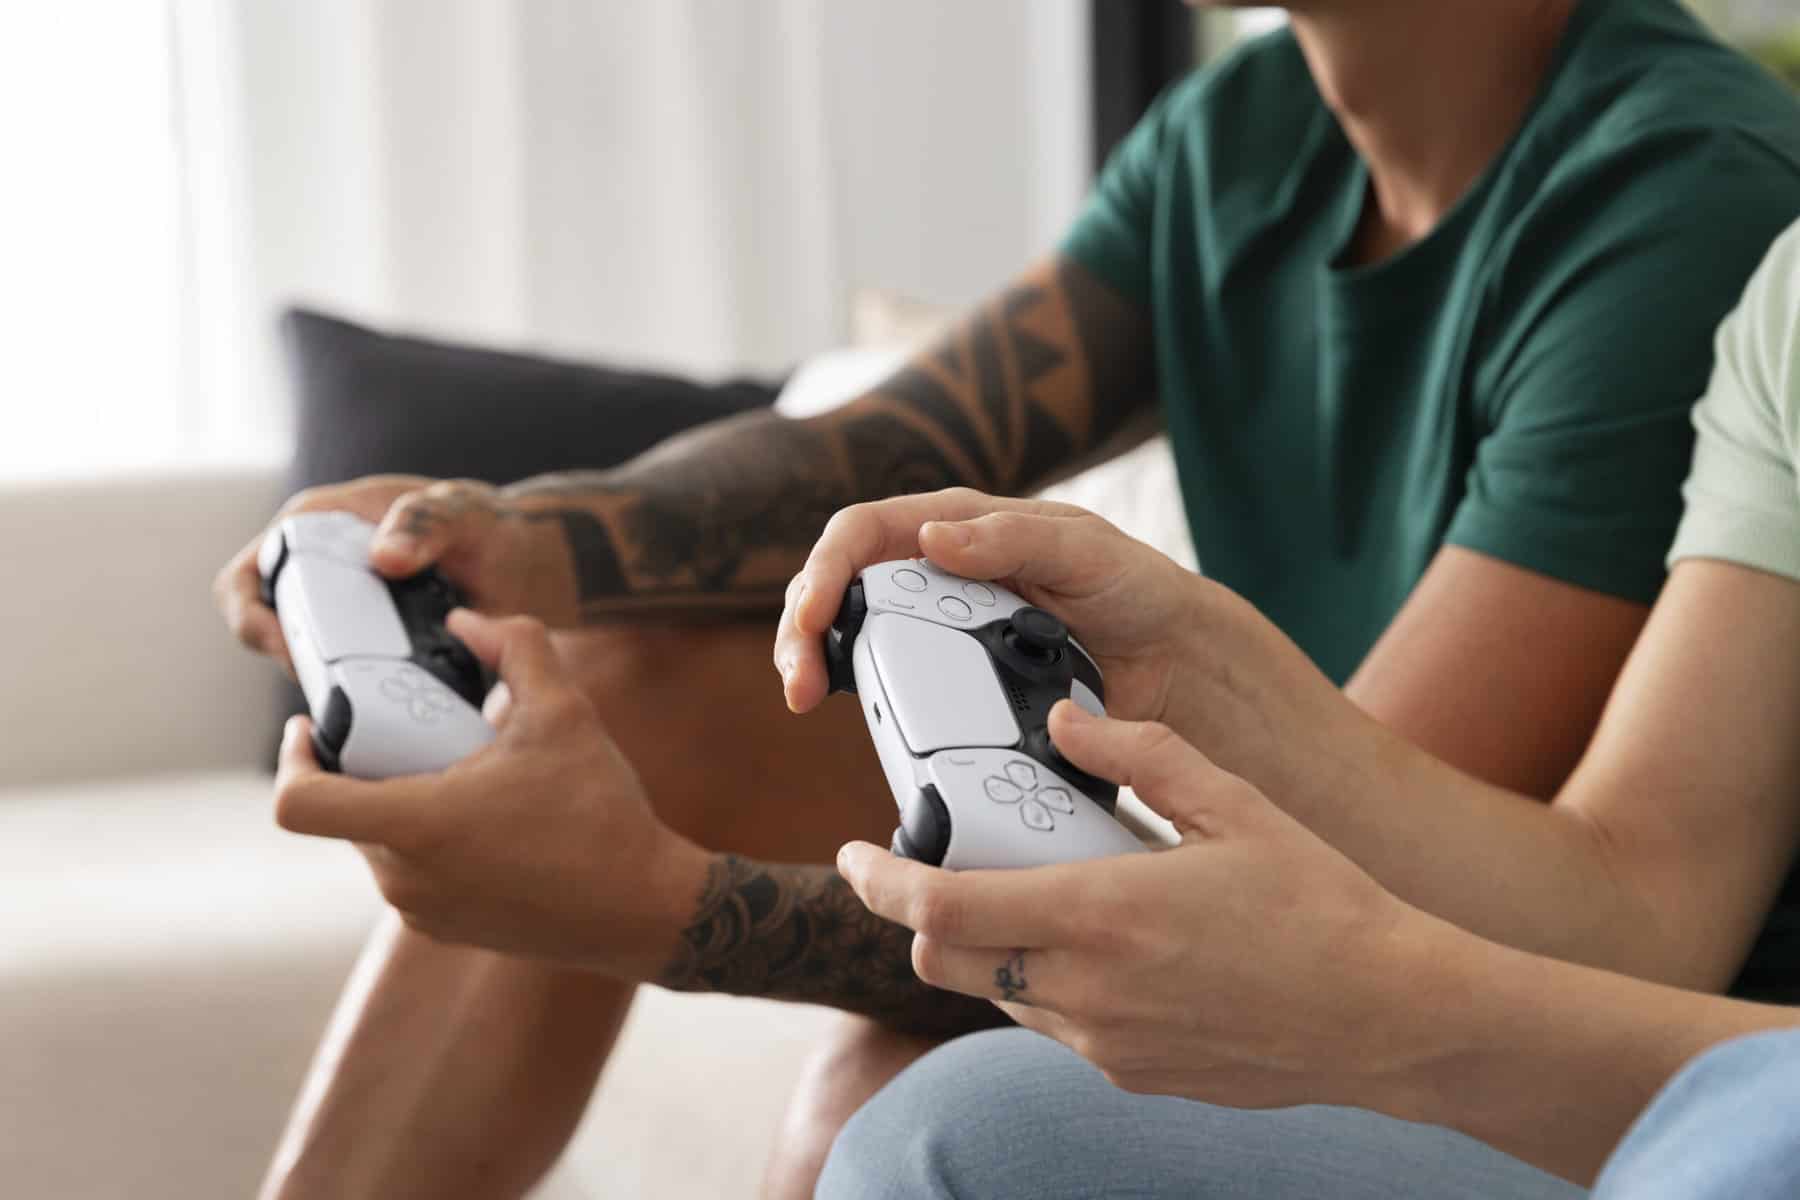 Two people's hands are seen holding game controllers.